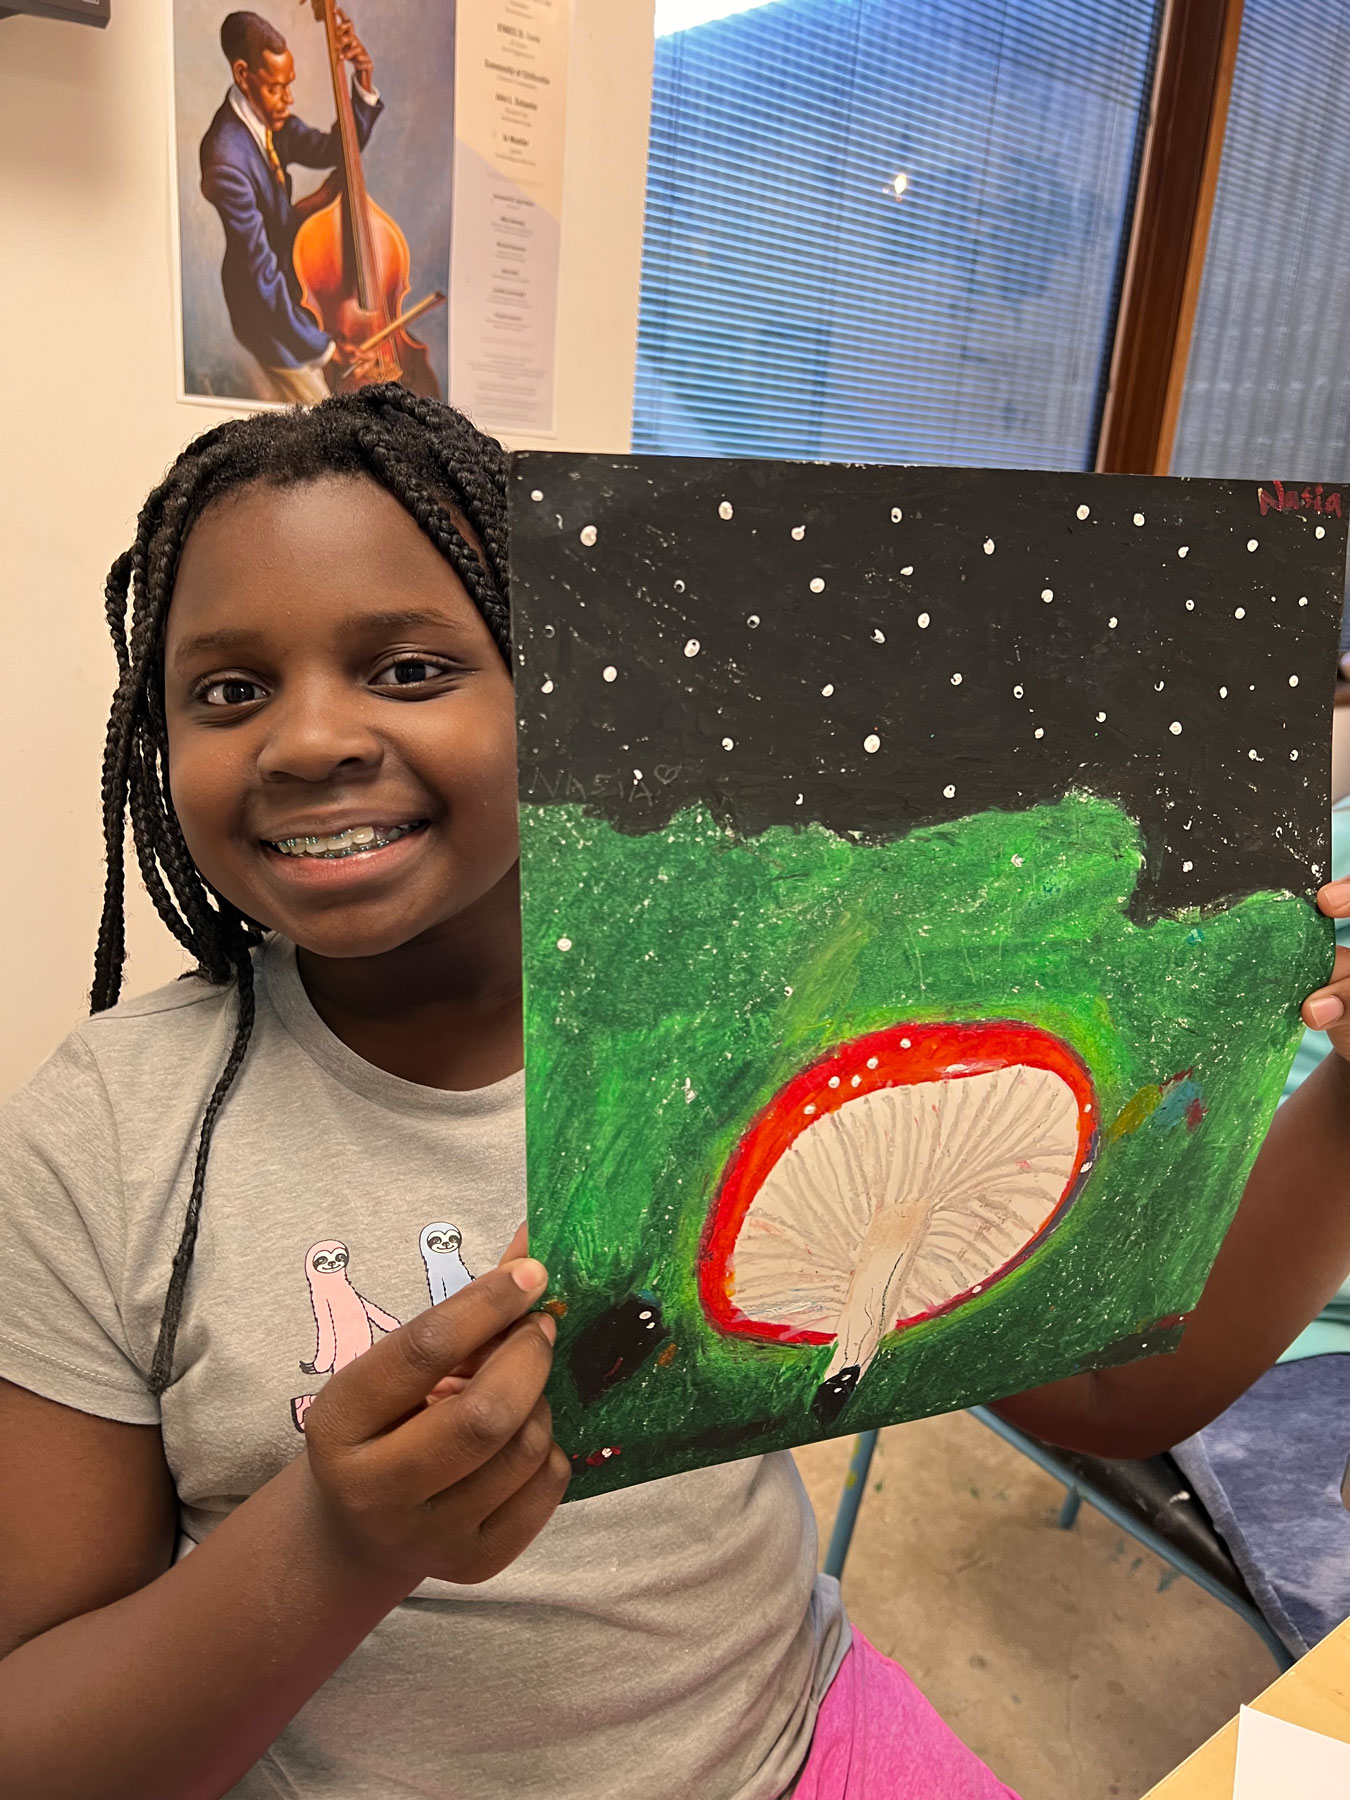 Nasia Chiteri displays her oil pastel drawing of a mushroom at night in illustration class.